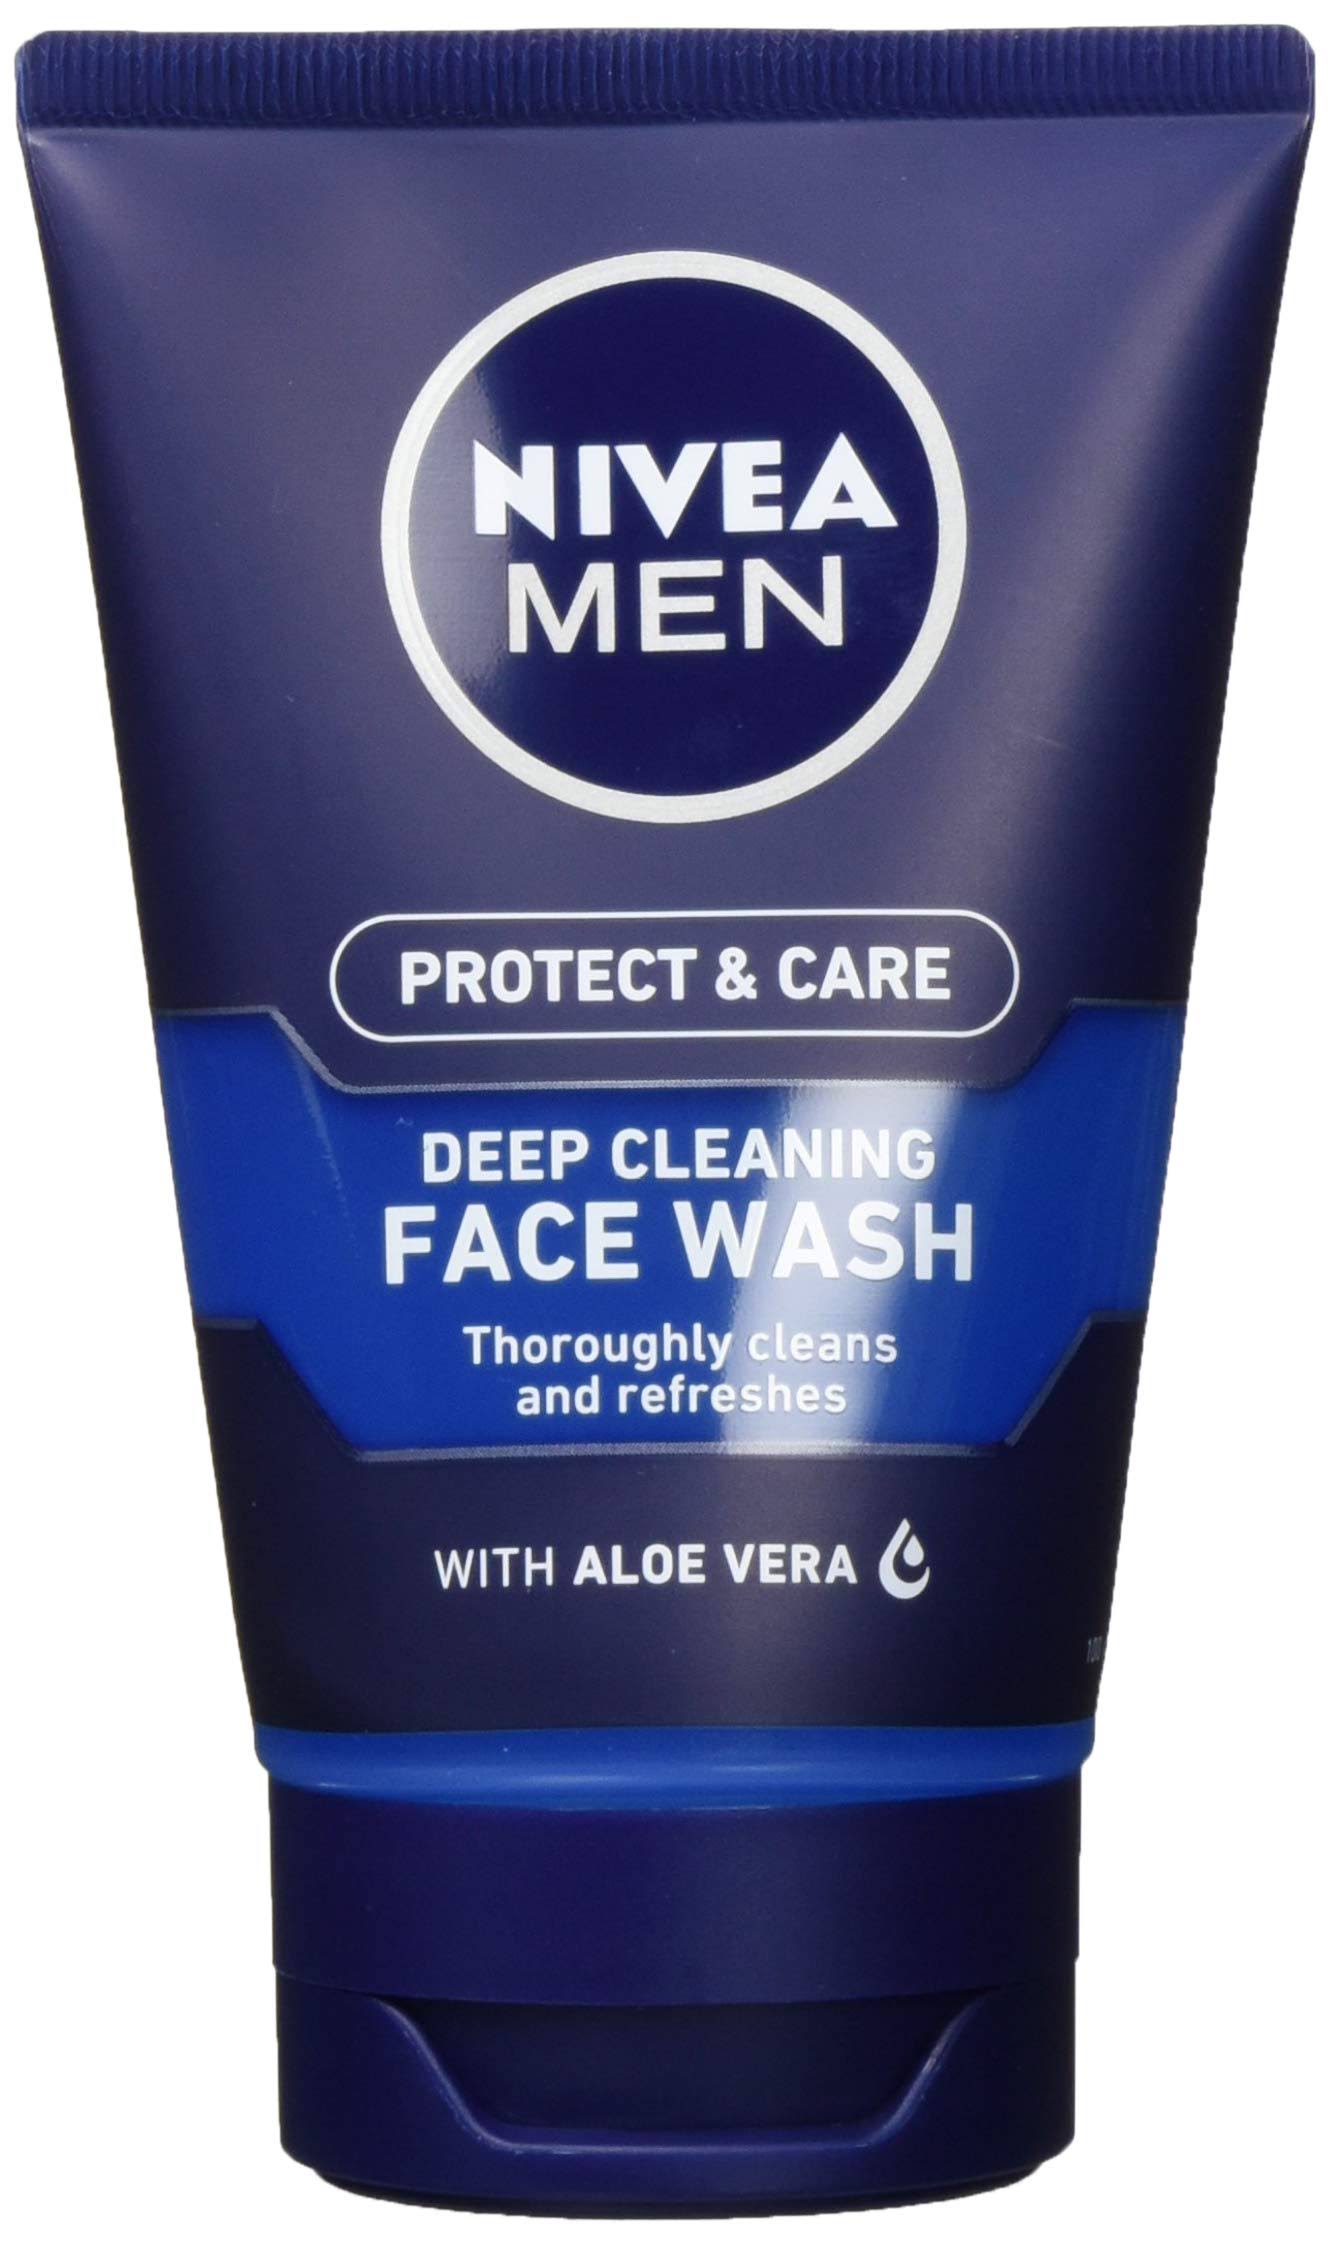 Nivea Men Protect and Care Deep Cleaning Face Wash - 100ml